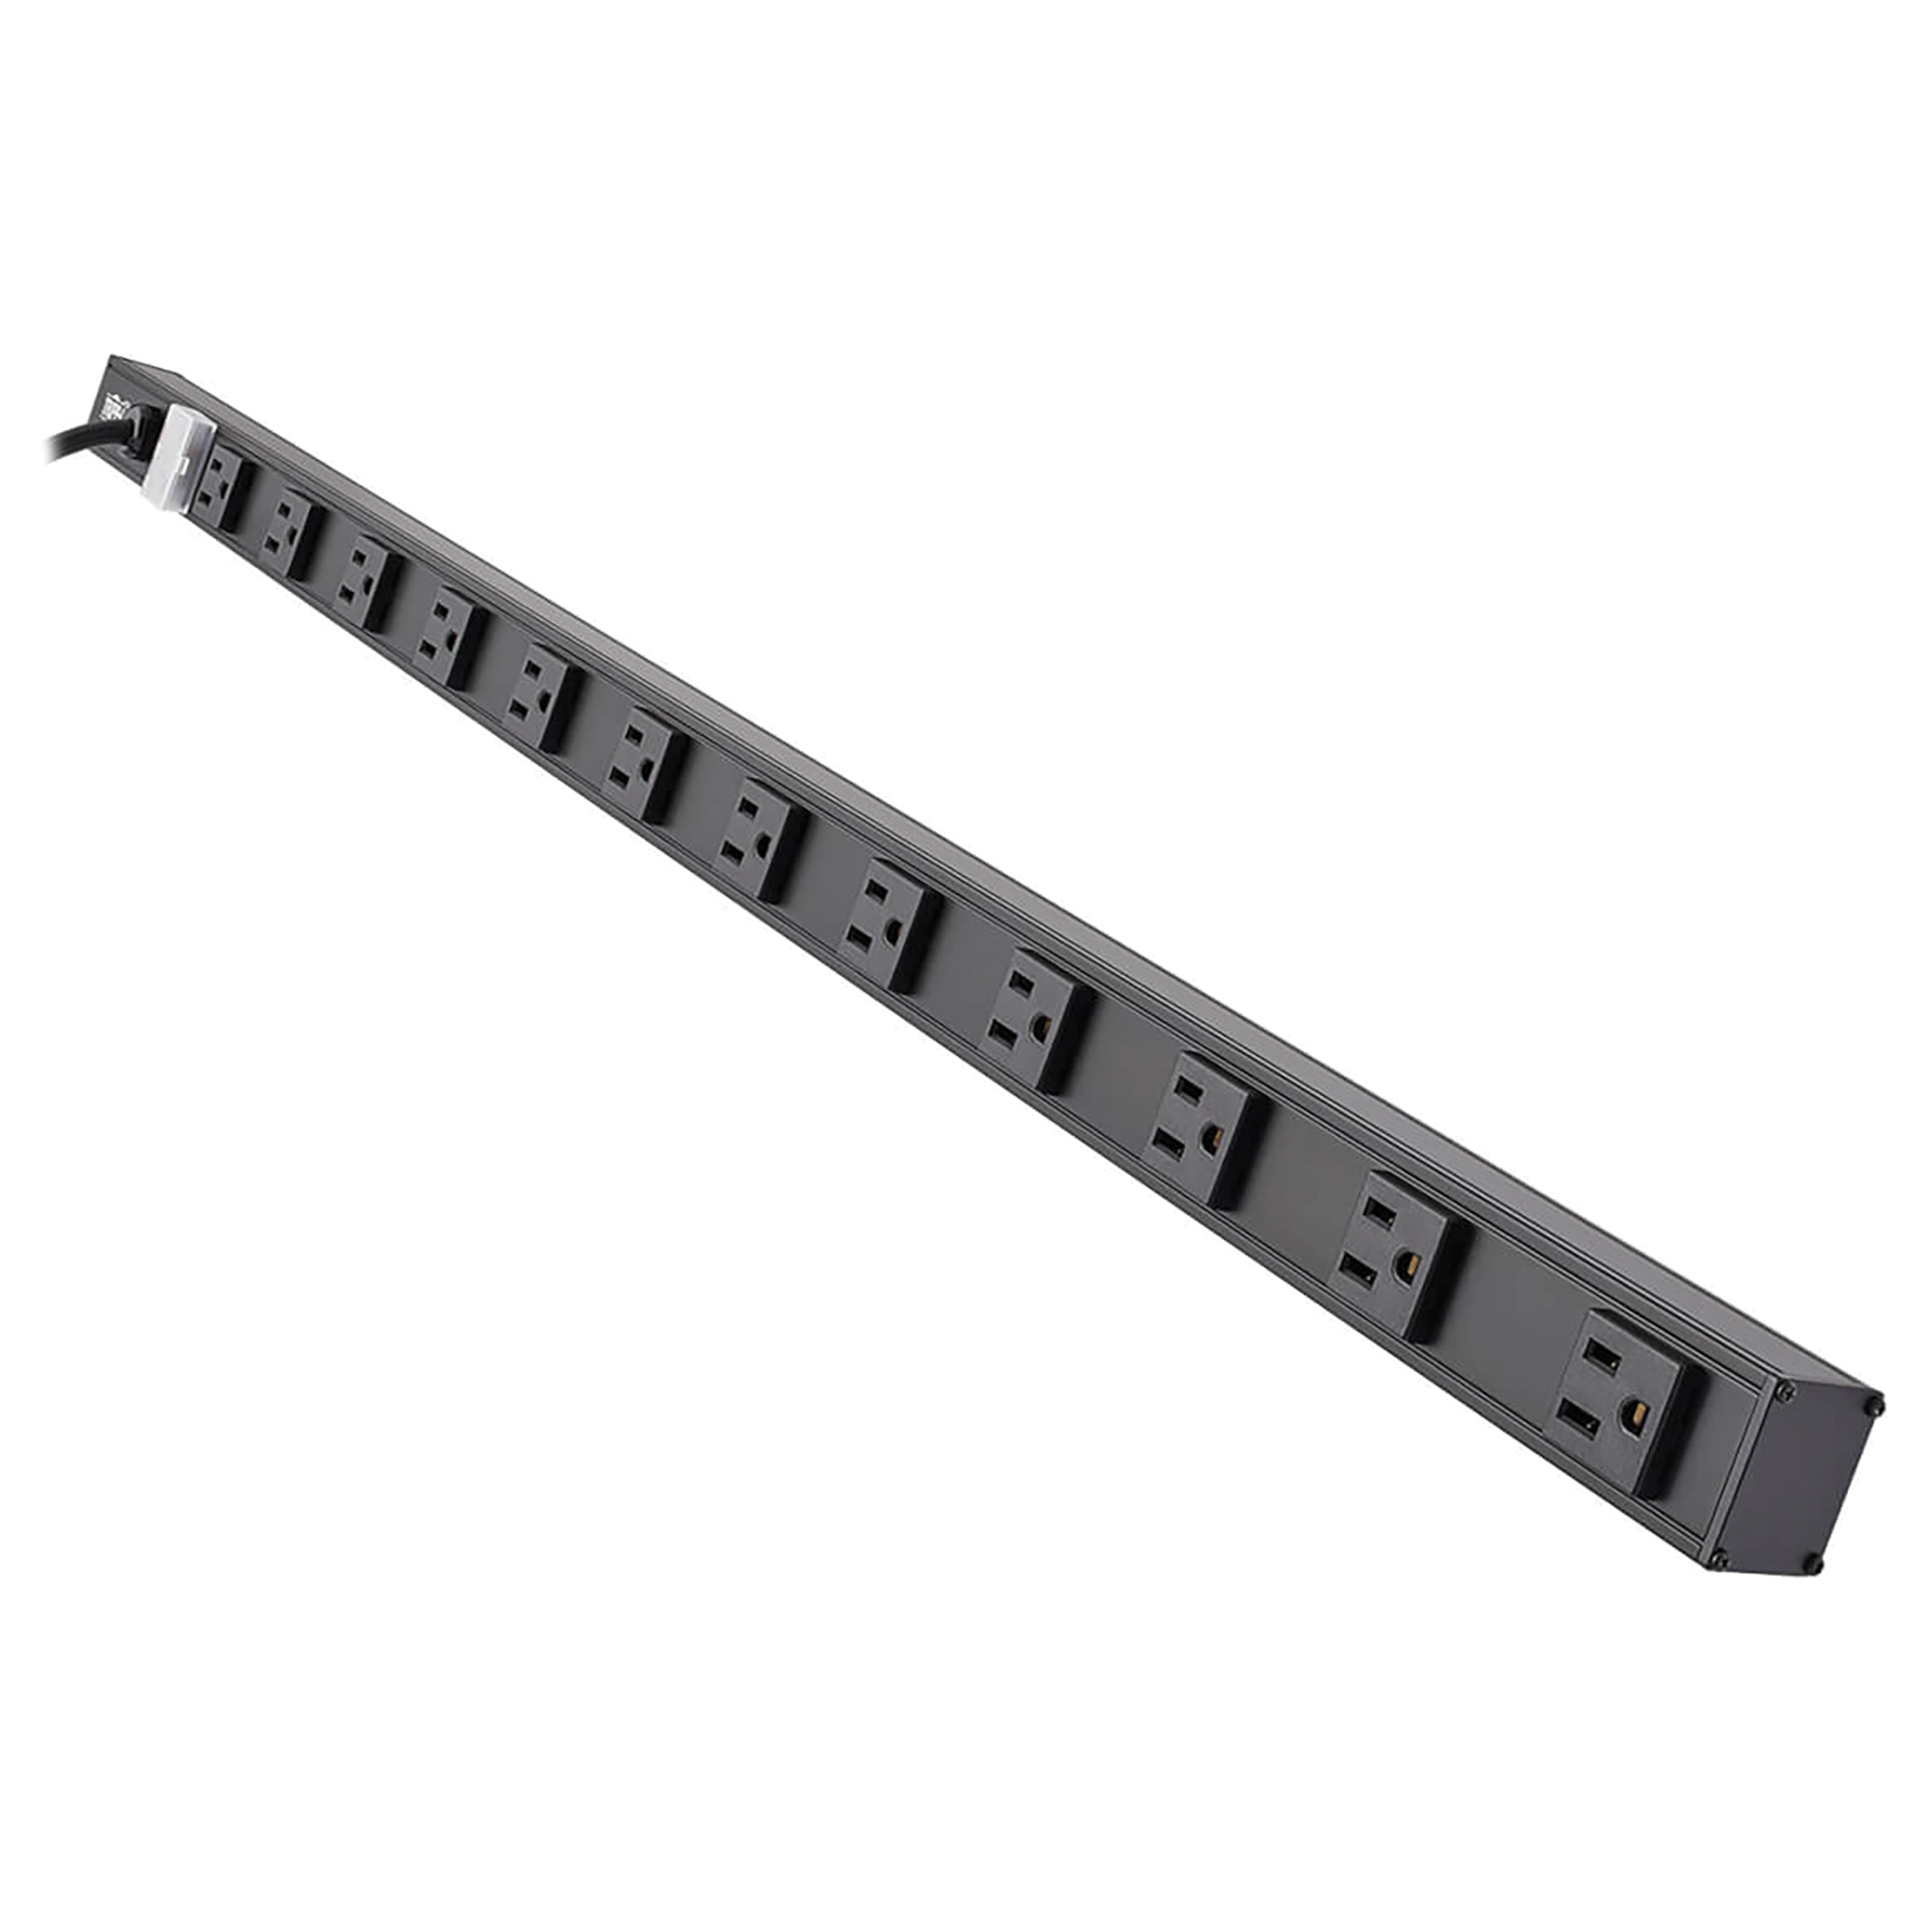 Tripp Lite by Eaton, 12-Outlet Vertical Power Strip, Cord Length 15 ft, Cable Gauge 14 Amps 15 Model PS3612B